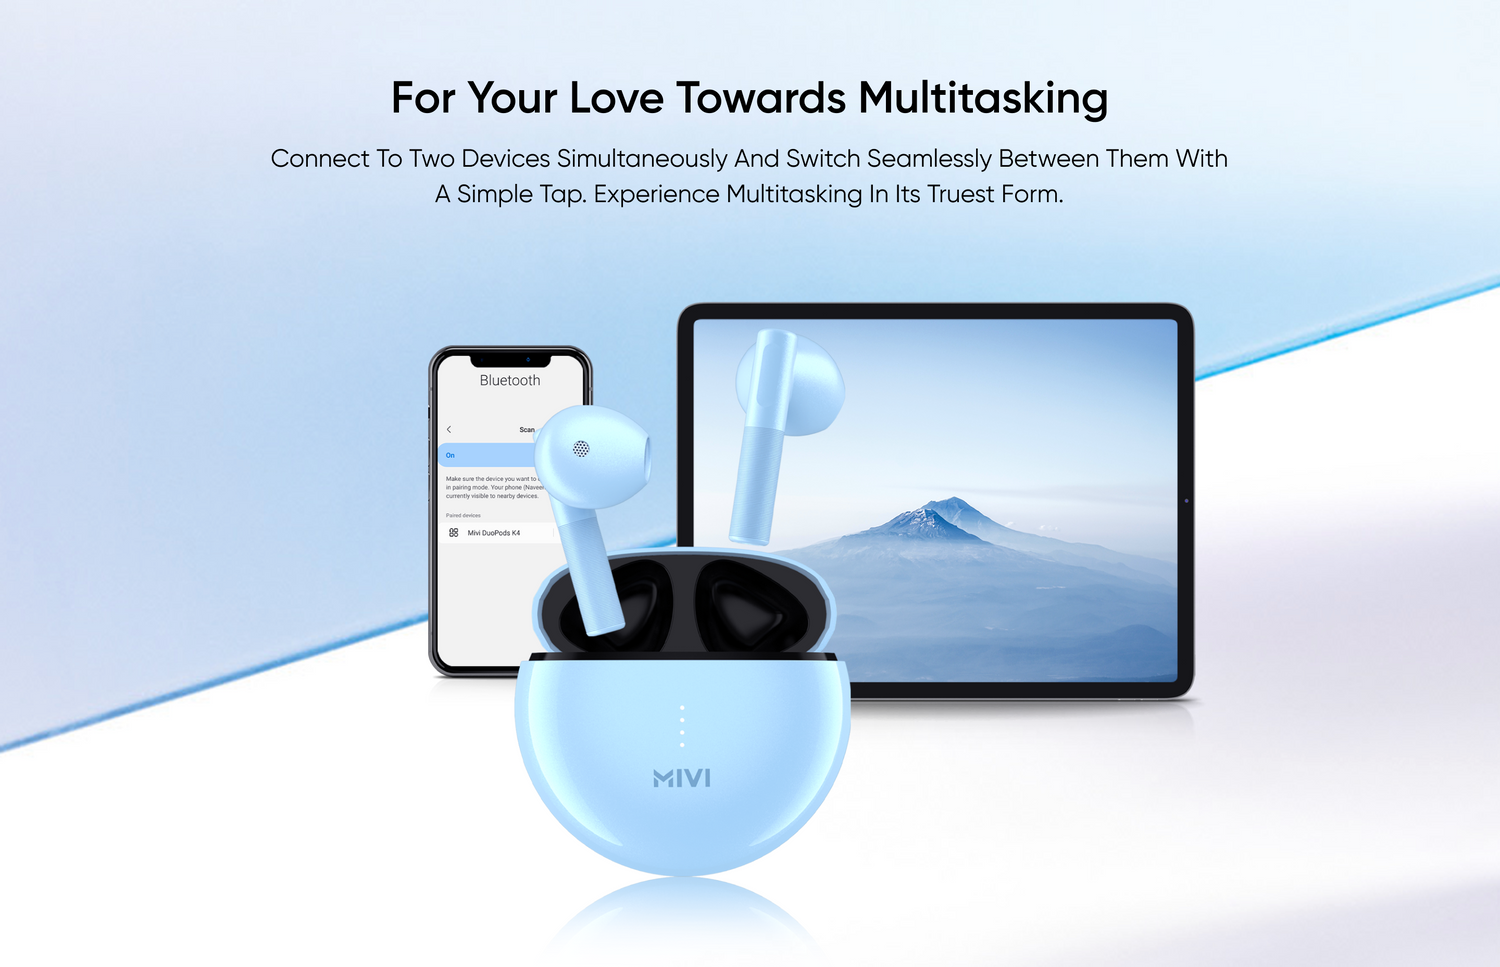 For Your Love Towards Multitasking
Connect to two devices simultaneously and switch seamlessly between them with a simple tap. Experience multitasking in its truest form.